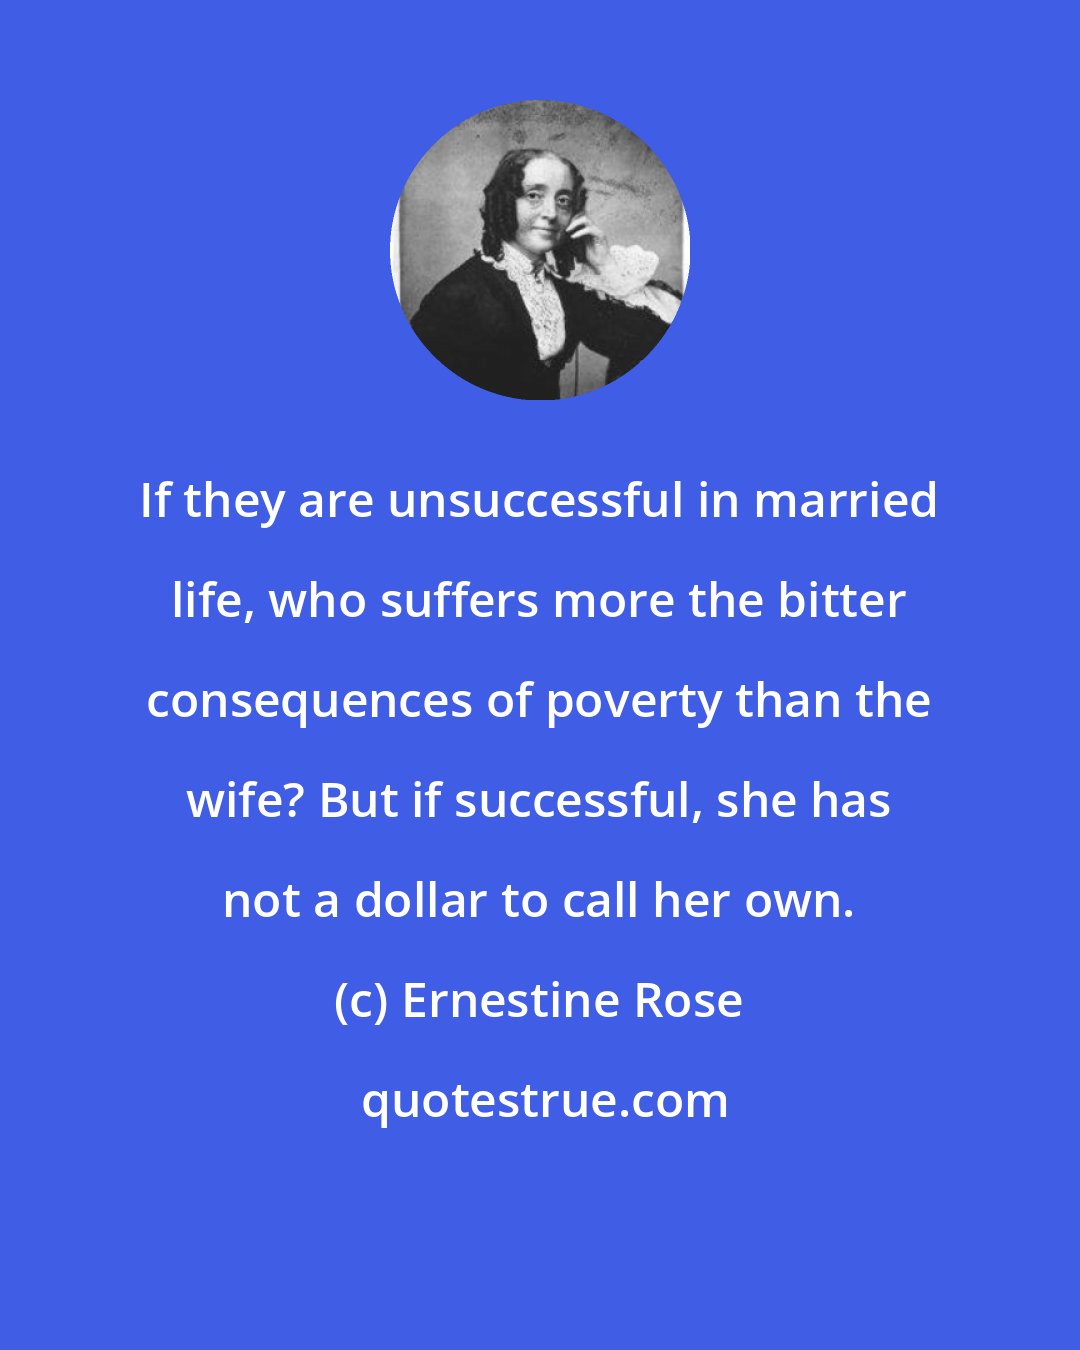 Ernestine Rose: If they are unsuccessful in married life, who suffers more the bitter consequences of poverty than the wife? But if successful, she has not a dollar to call her own.